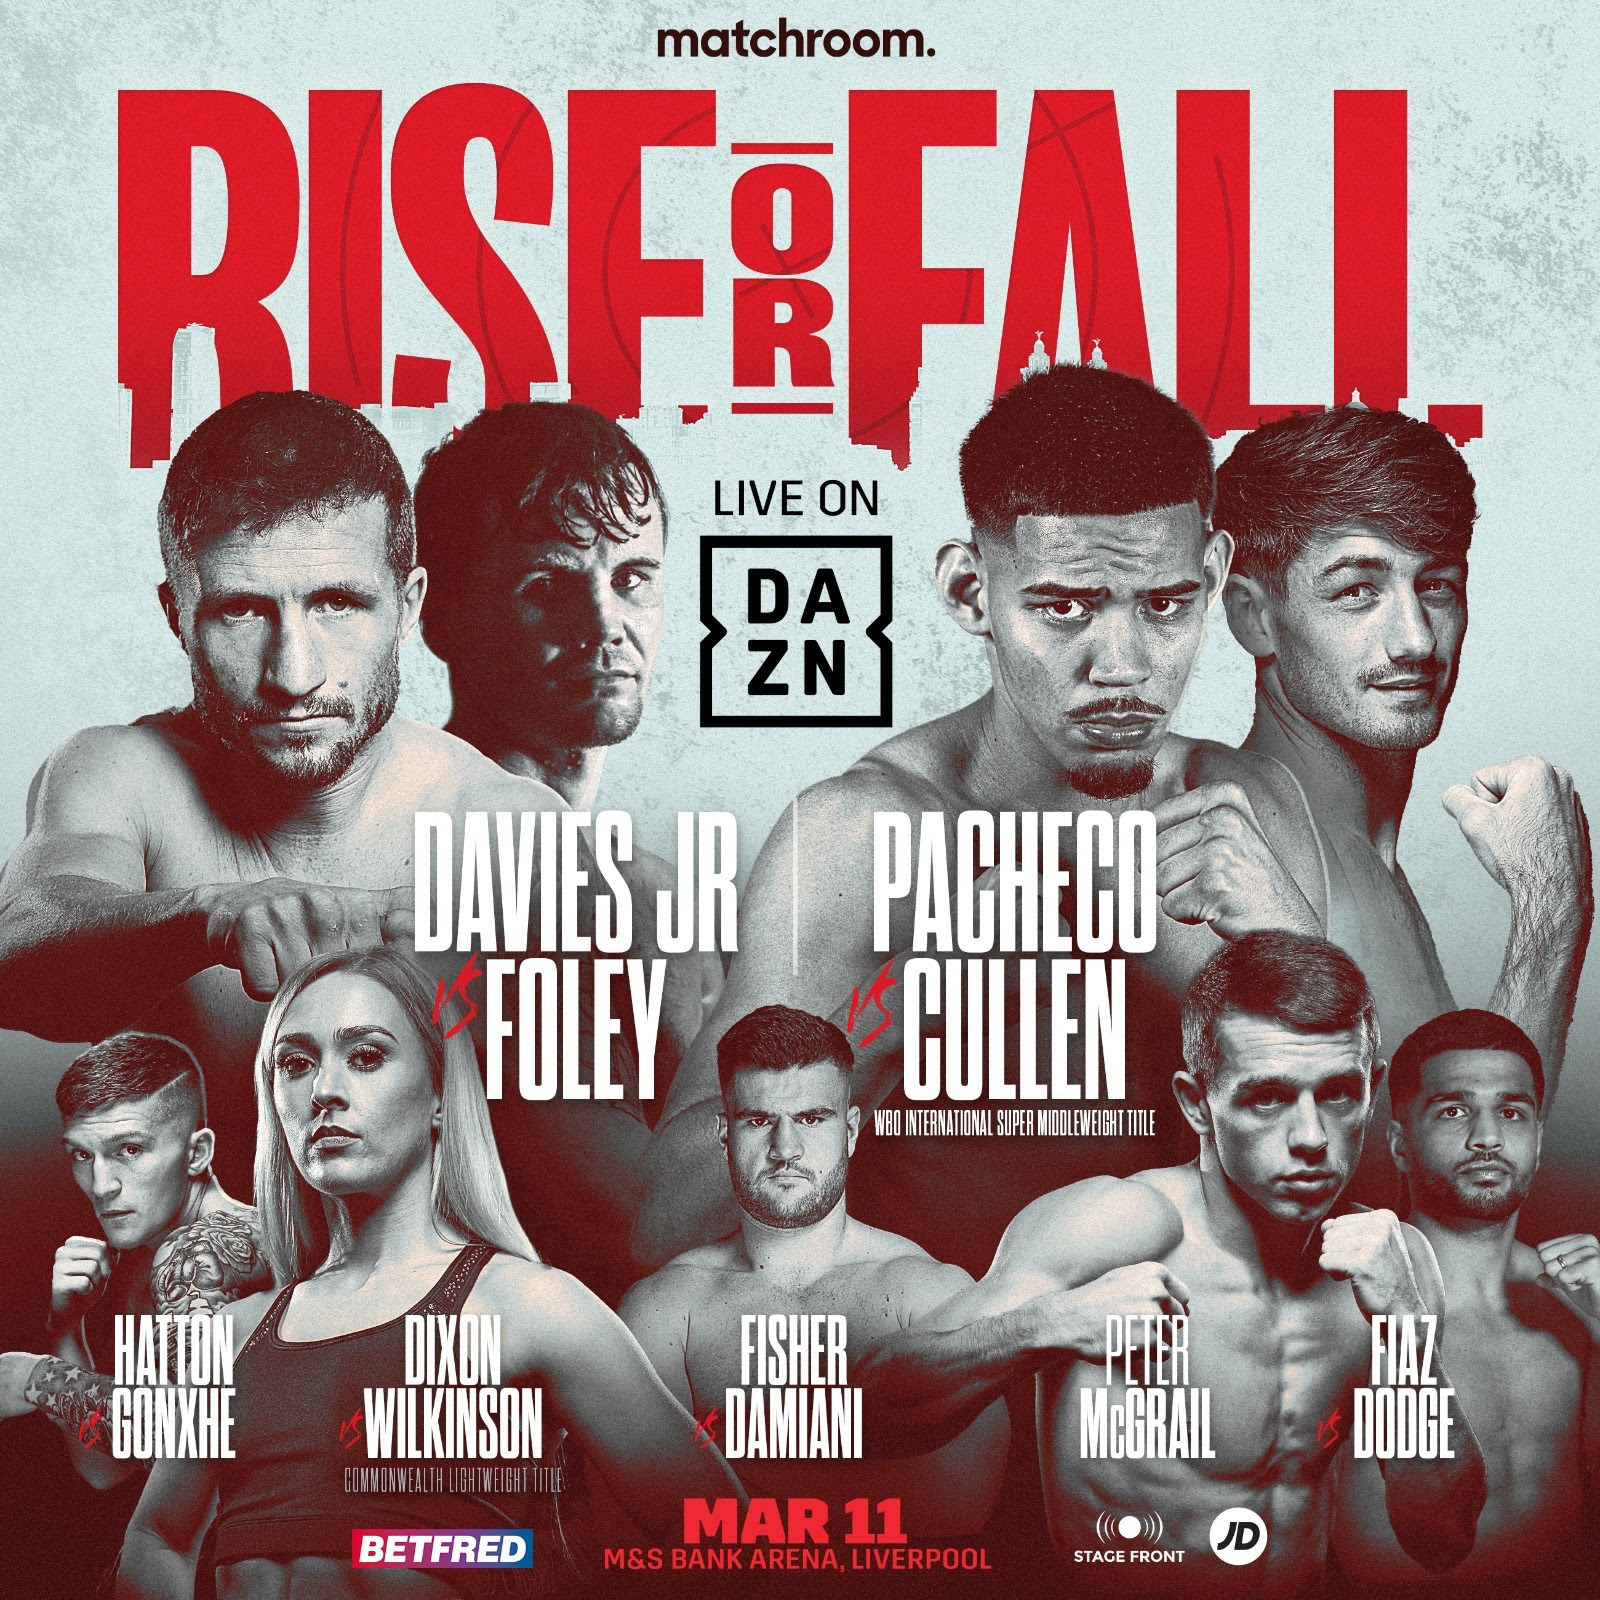 Image: Callum Smith injured, pulls out of Pawel Stepien fight for March 11, Pacheco - Cullen headline